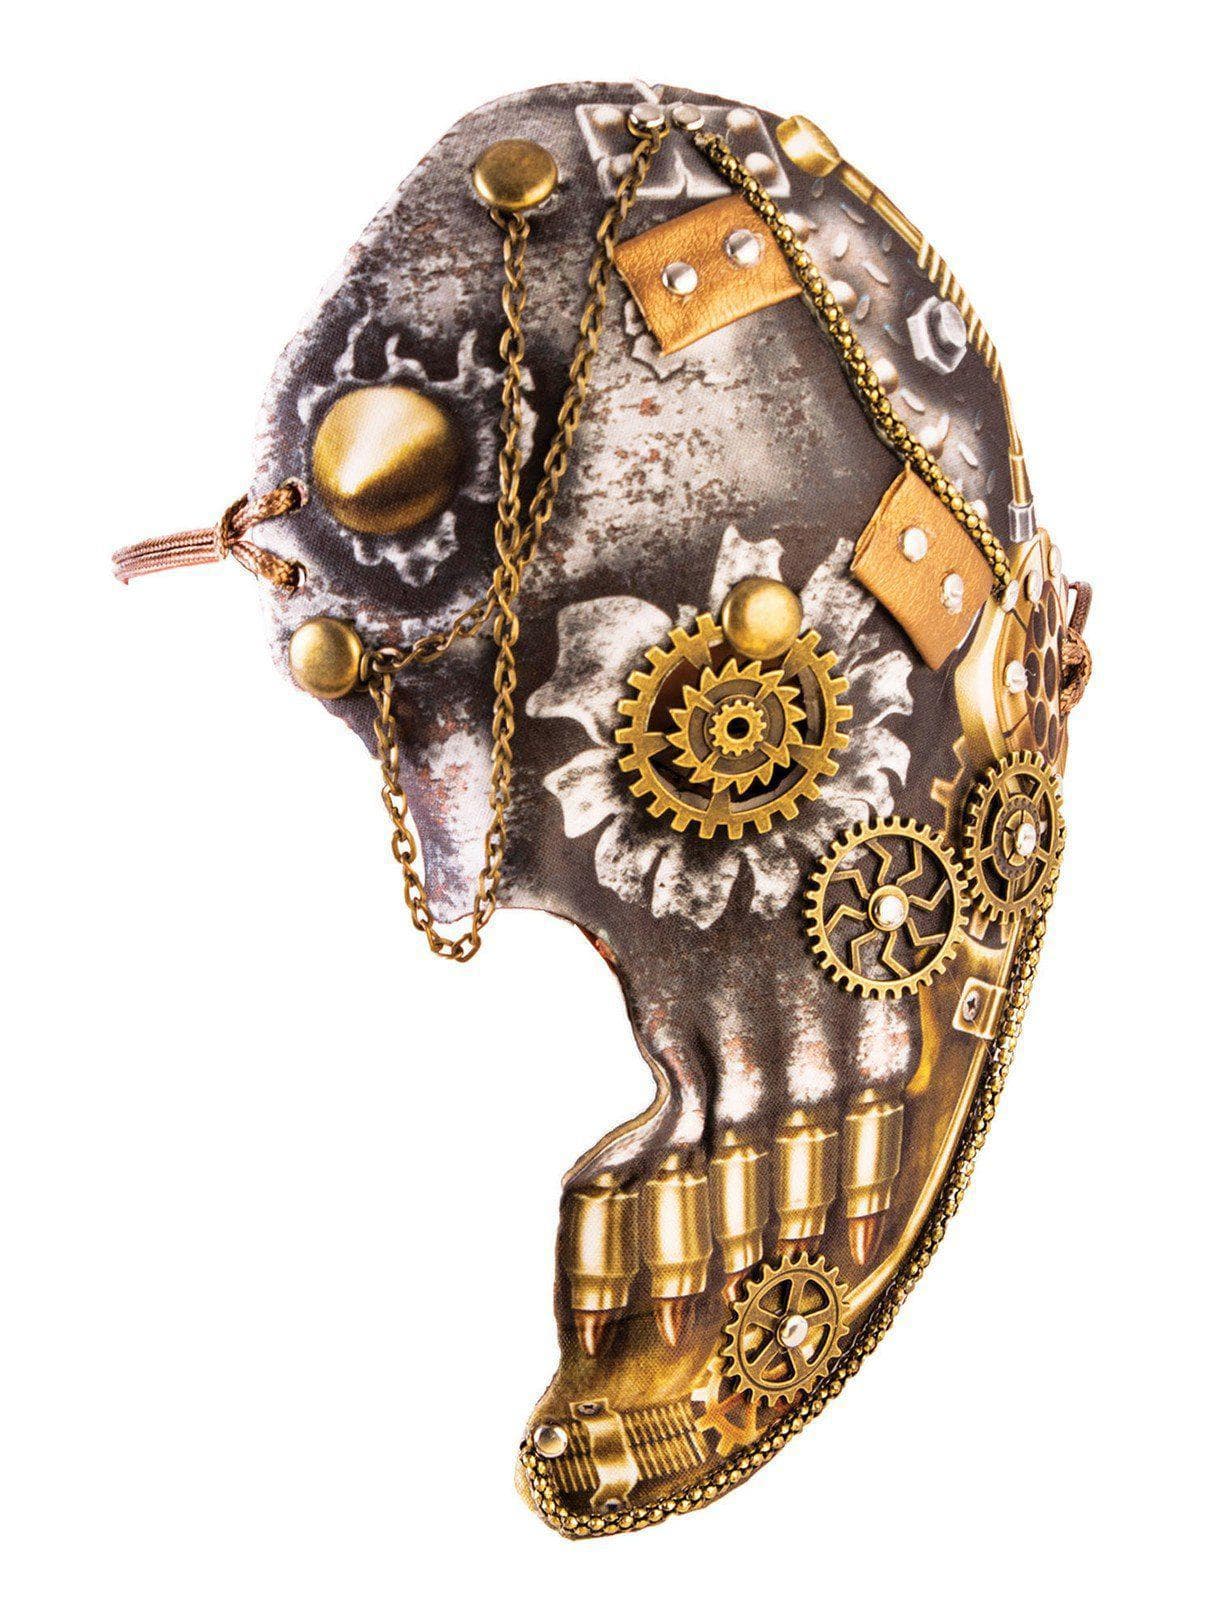 Adult Silver and Gold Steampunk Half Mask - costumes.com